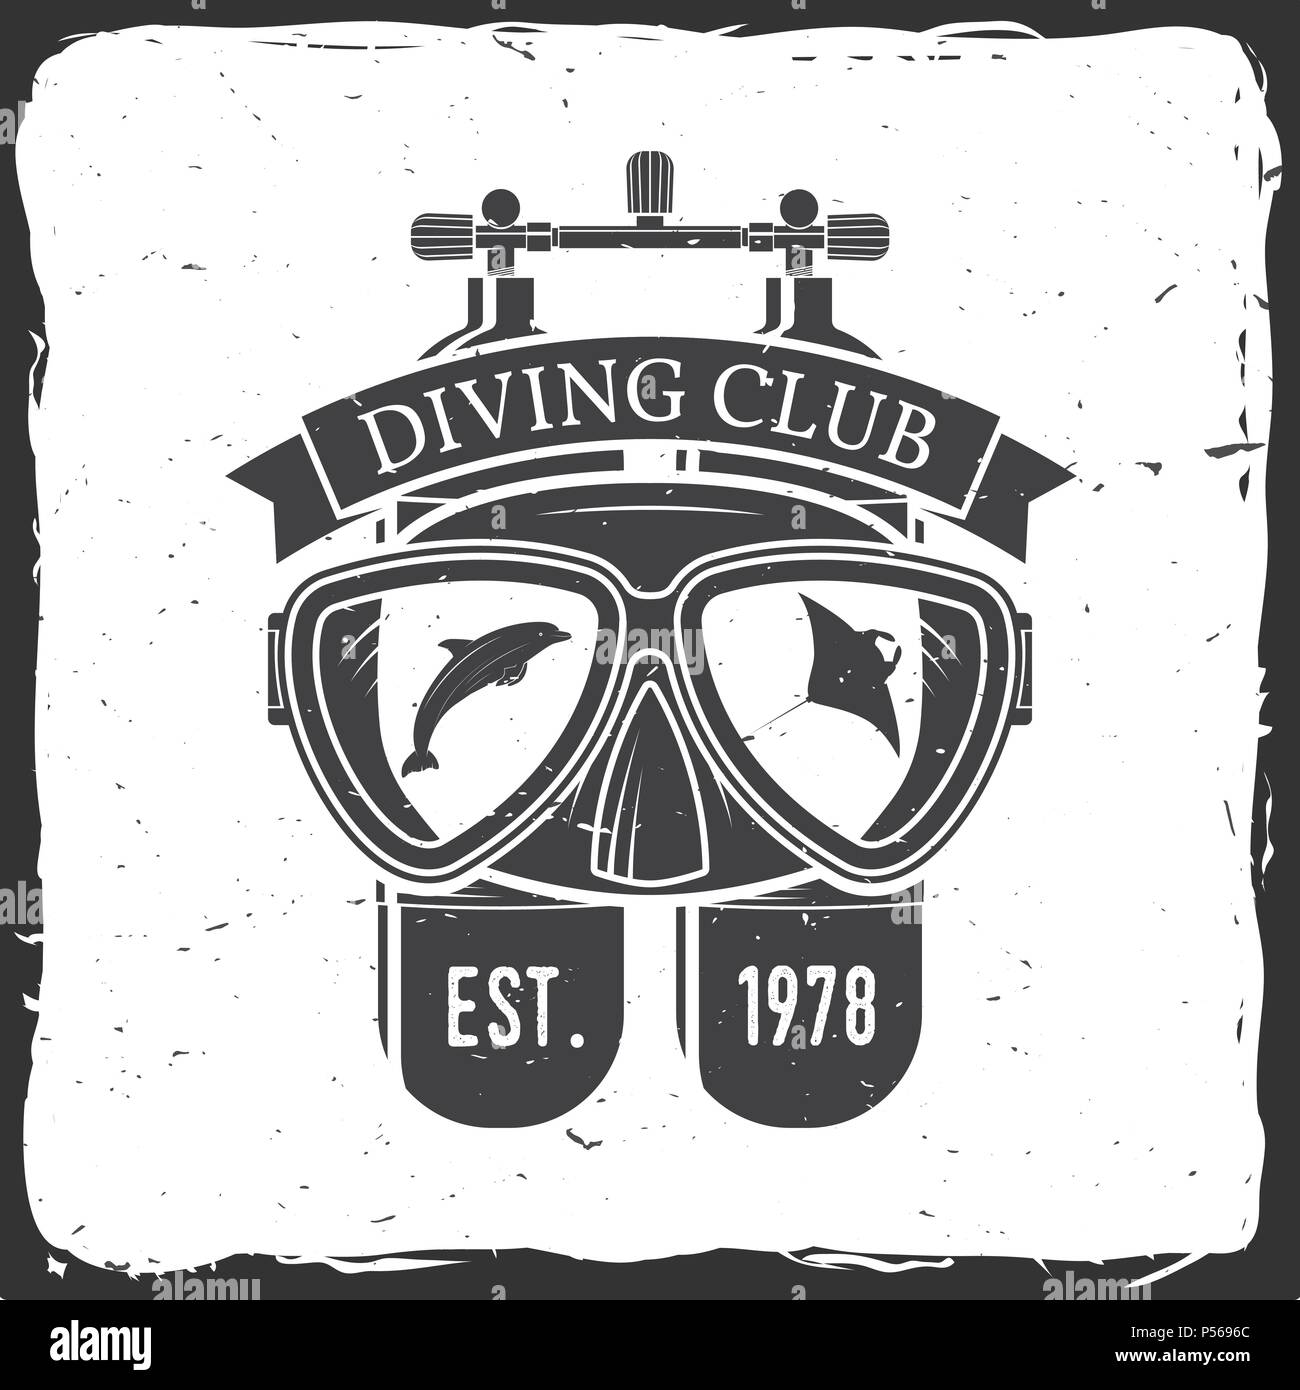 Diving club. Vector illustration. Concept for shirt or logo, print, stamp or tee. Vintage typography design with diving mask and dive tank silhouette. Stock Vector